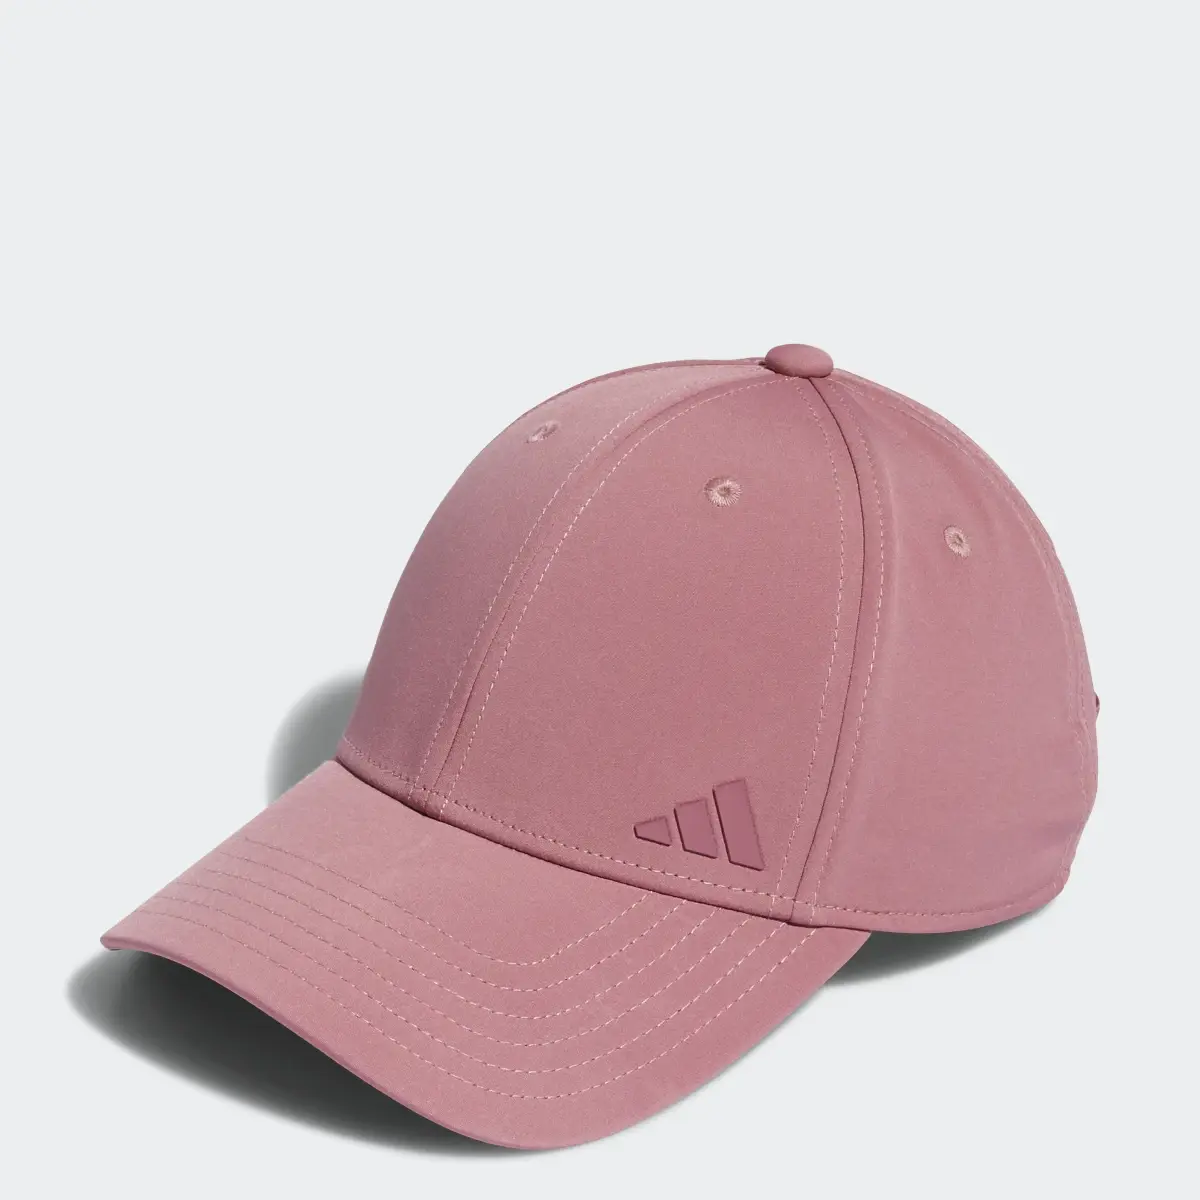 Adidas Backless Hat. 1